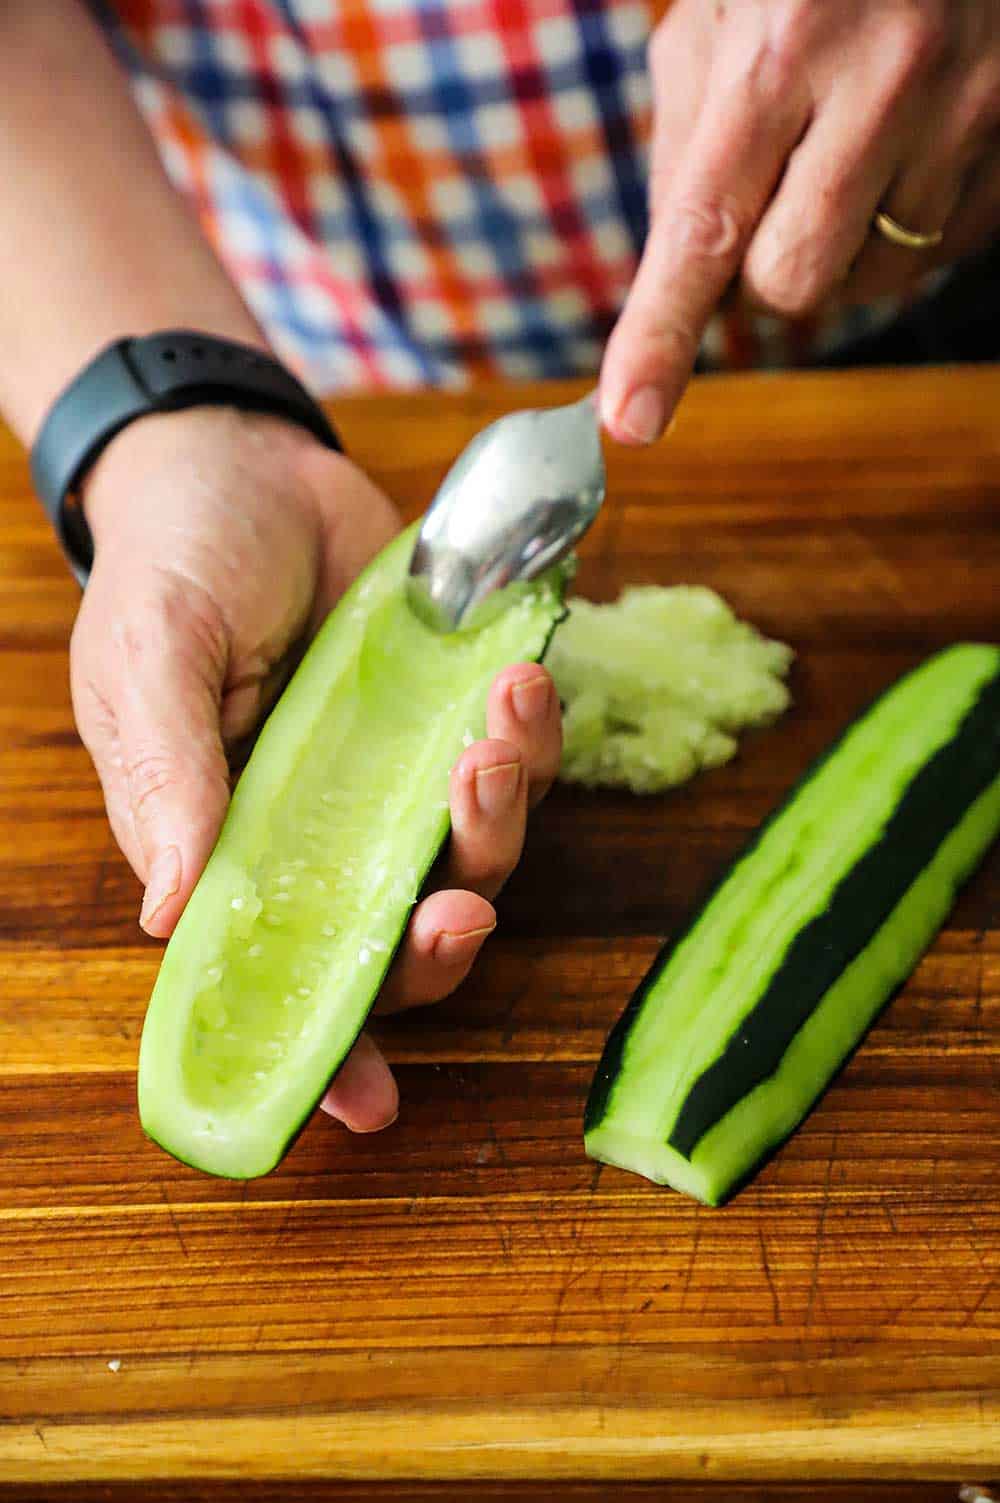 A person using a spoon to scoop out the seeds of a cucumber that has been cut in half lengthwise.